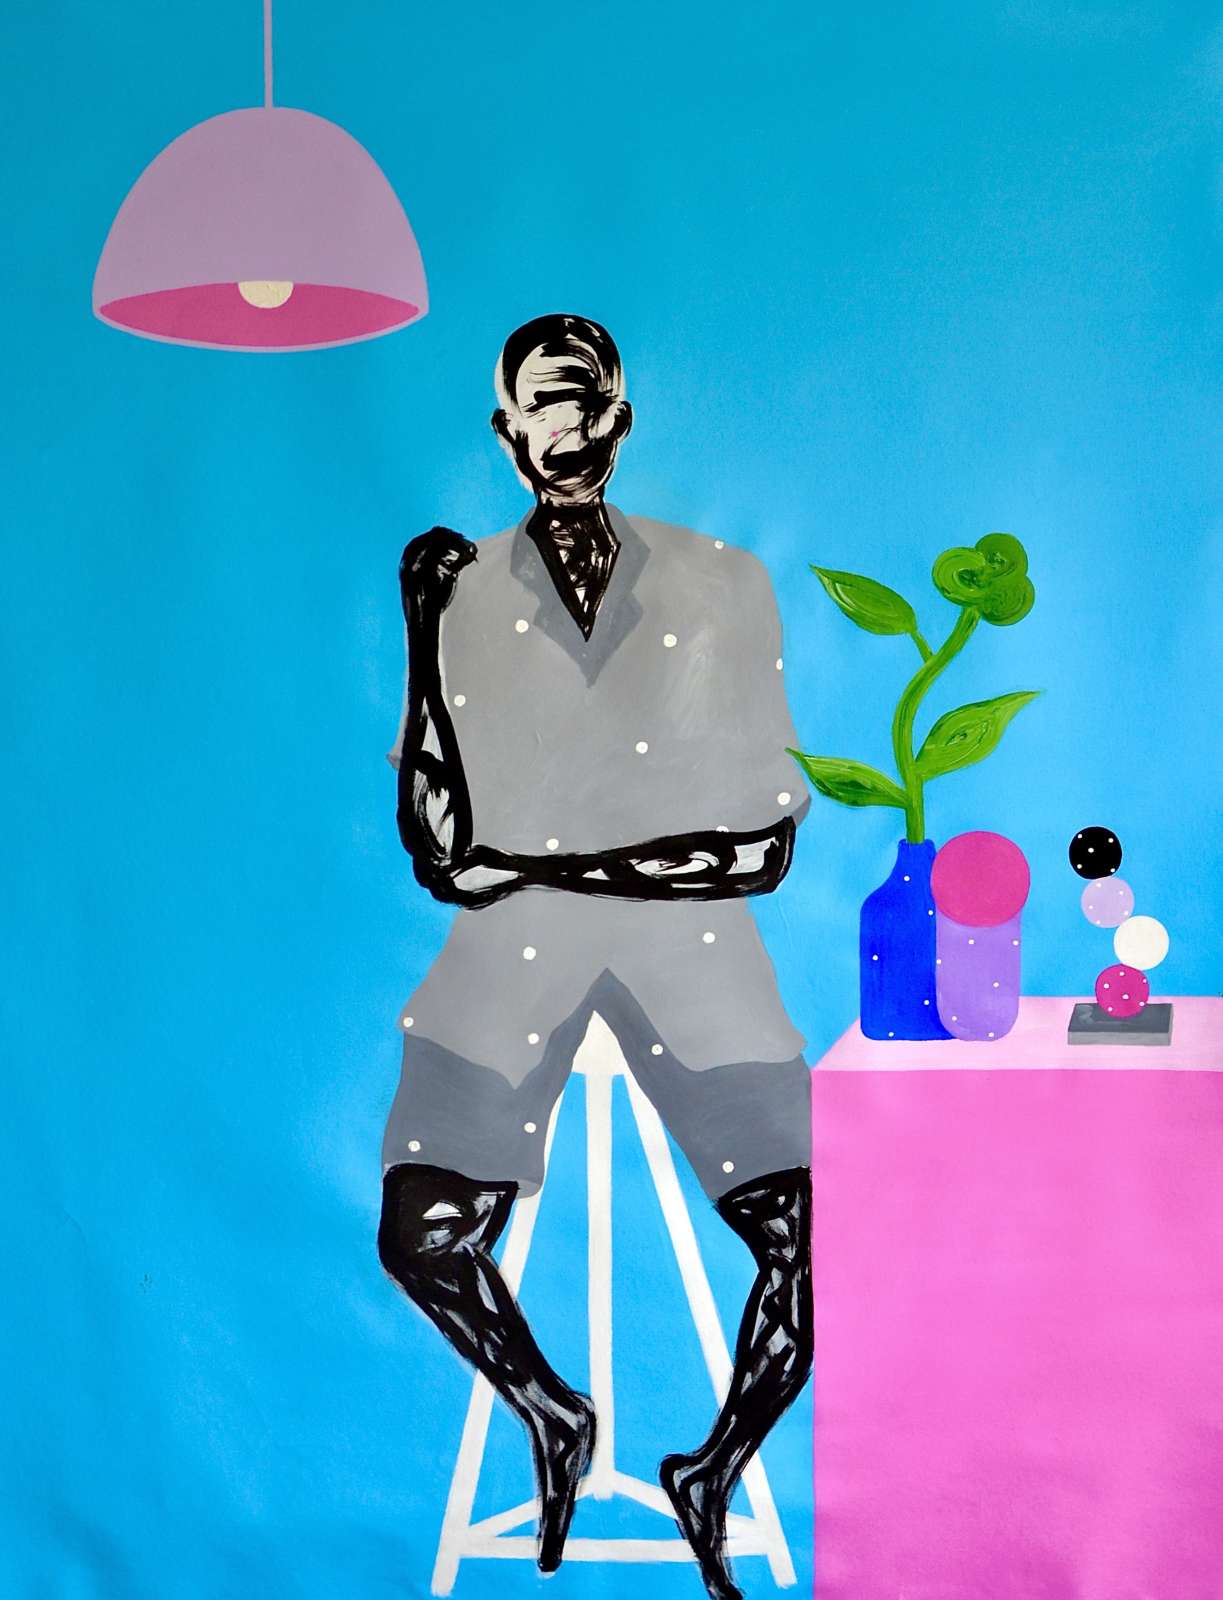 Abe Ogunlende, Stand for Something, 2021. Acrylic on canvas, 128 x 158cm